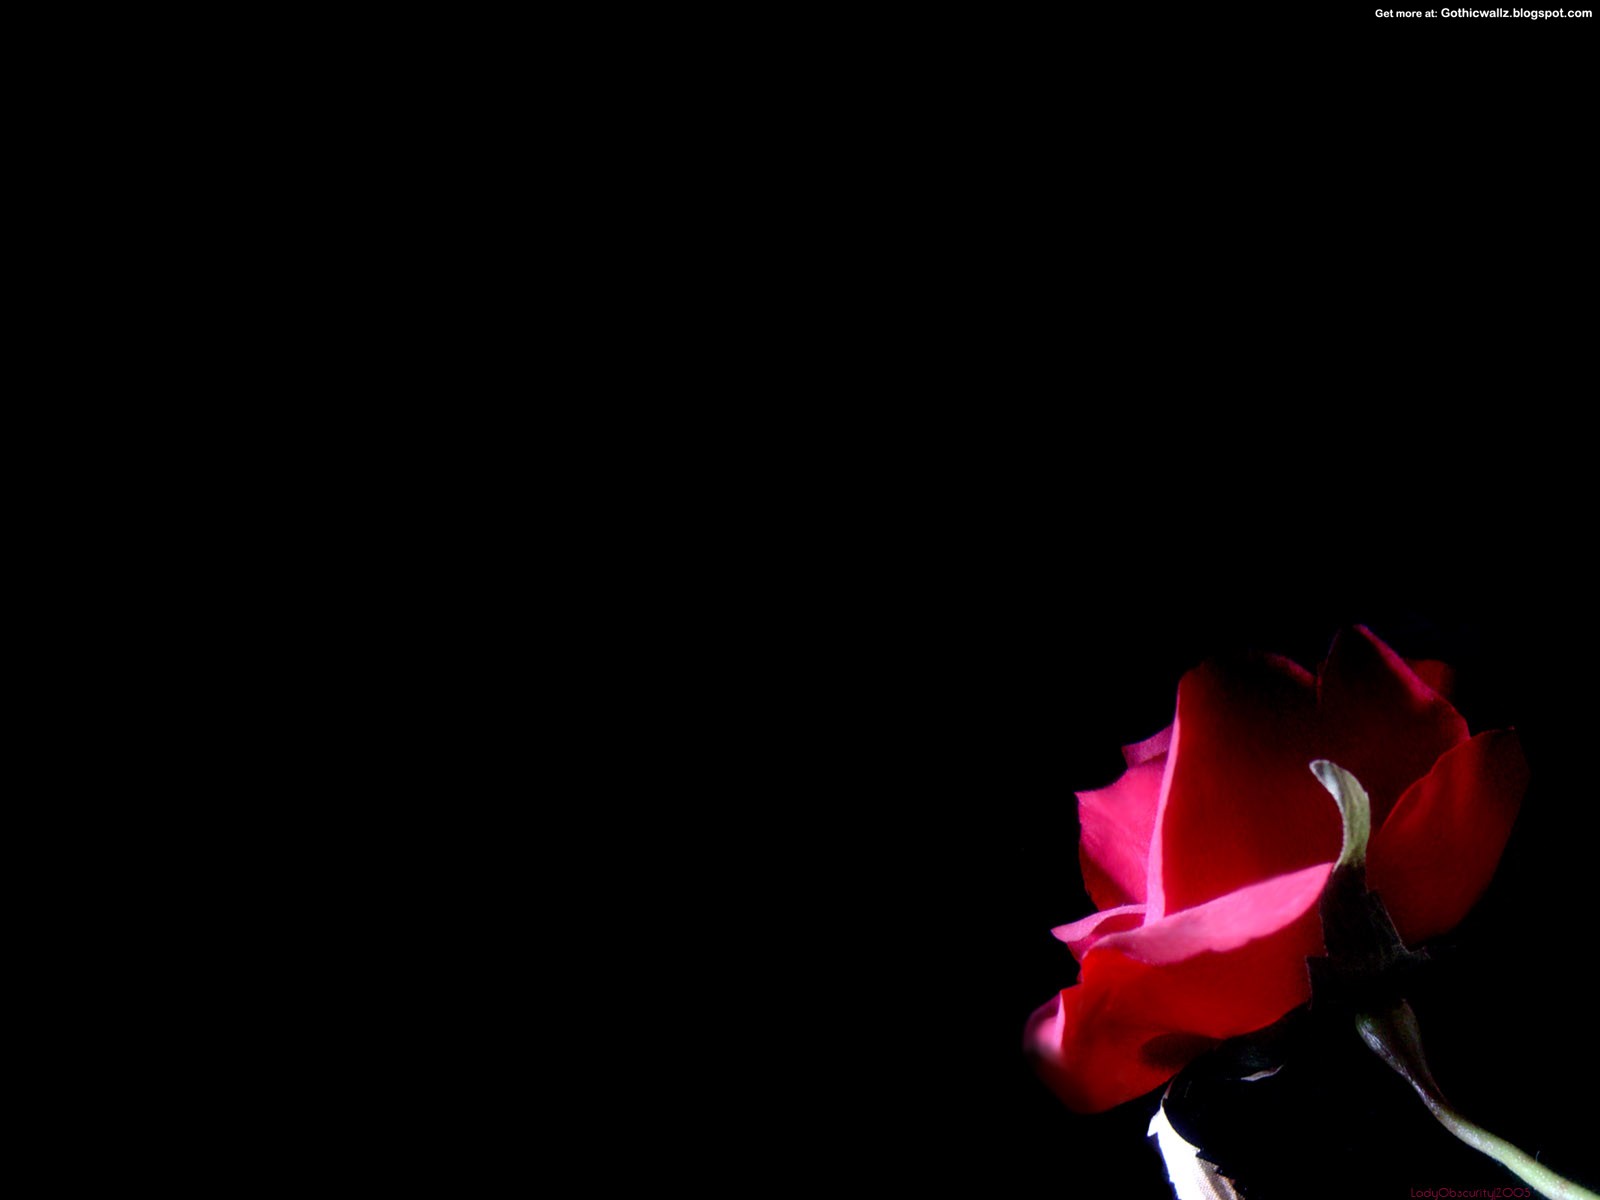 Gothic Rose HD Desktop Wallpaper Image And Photos